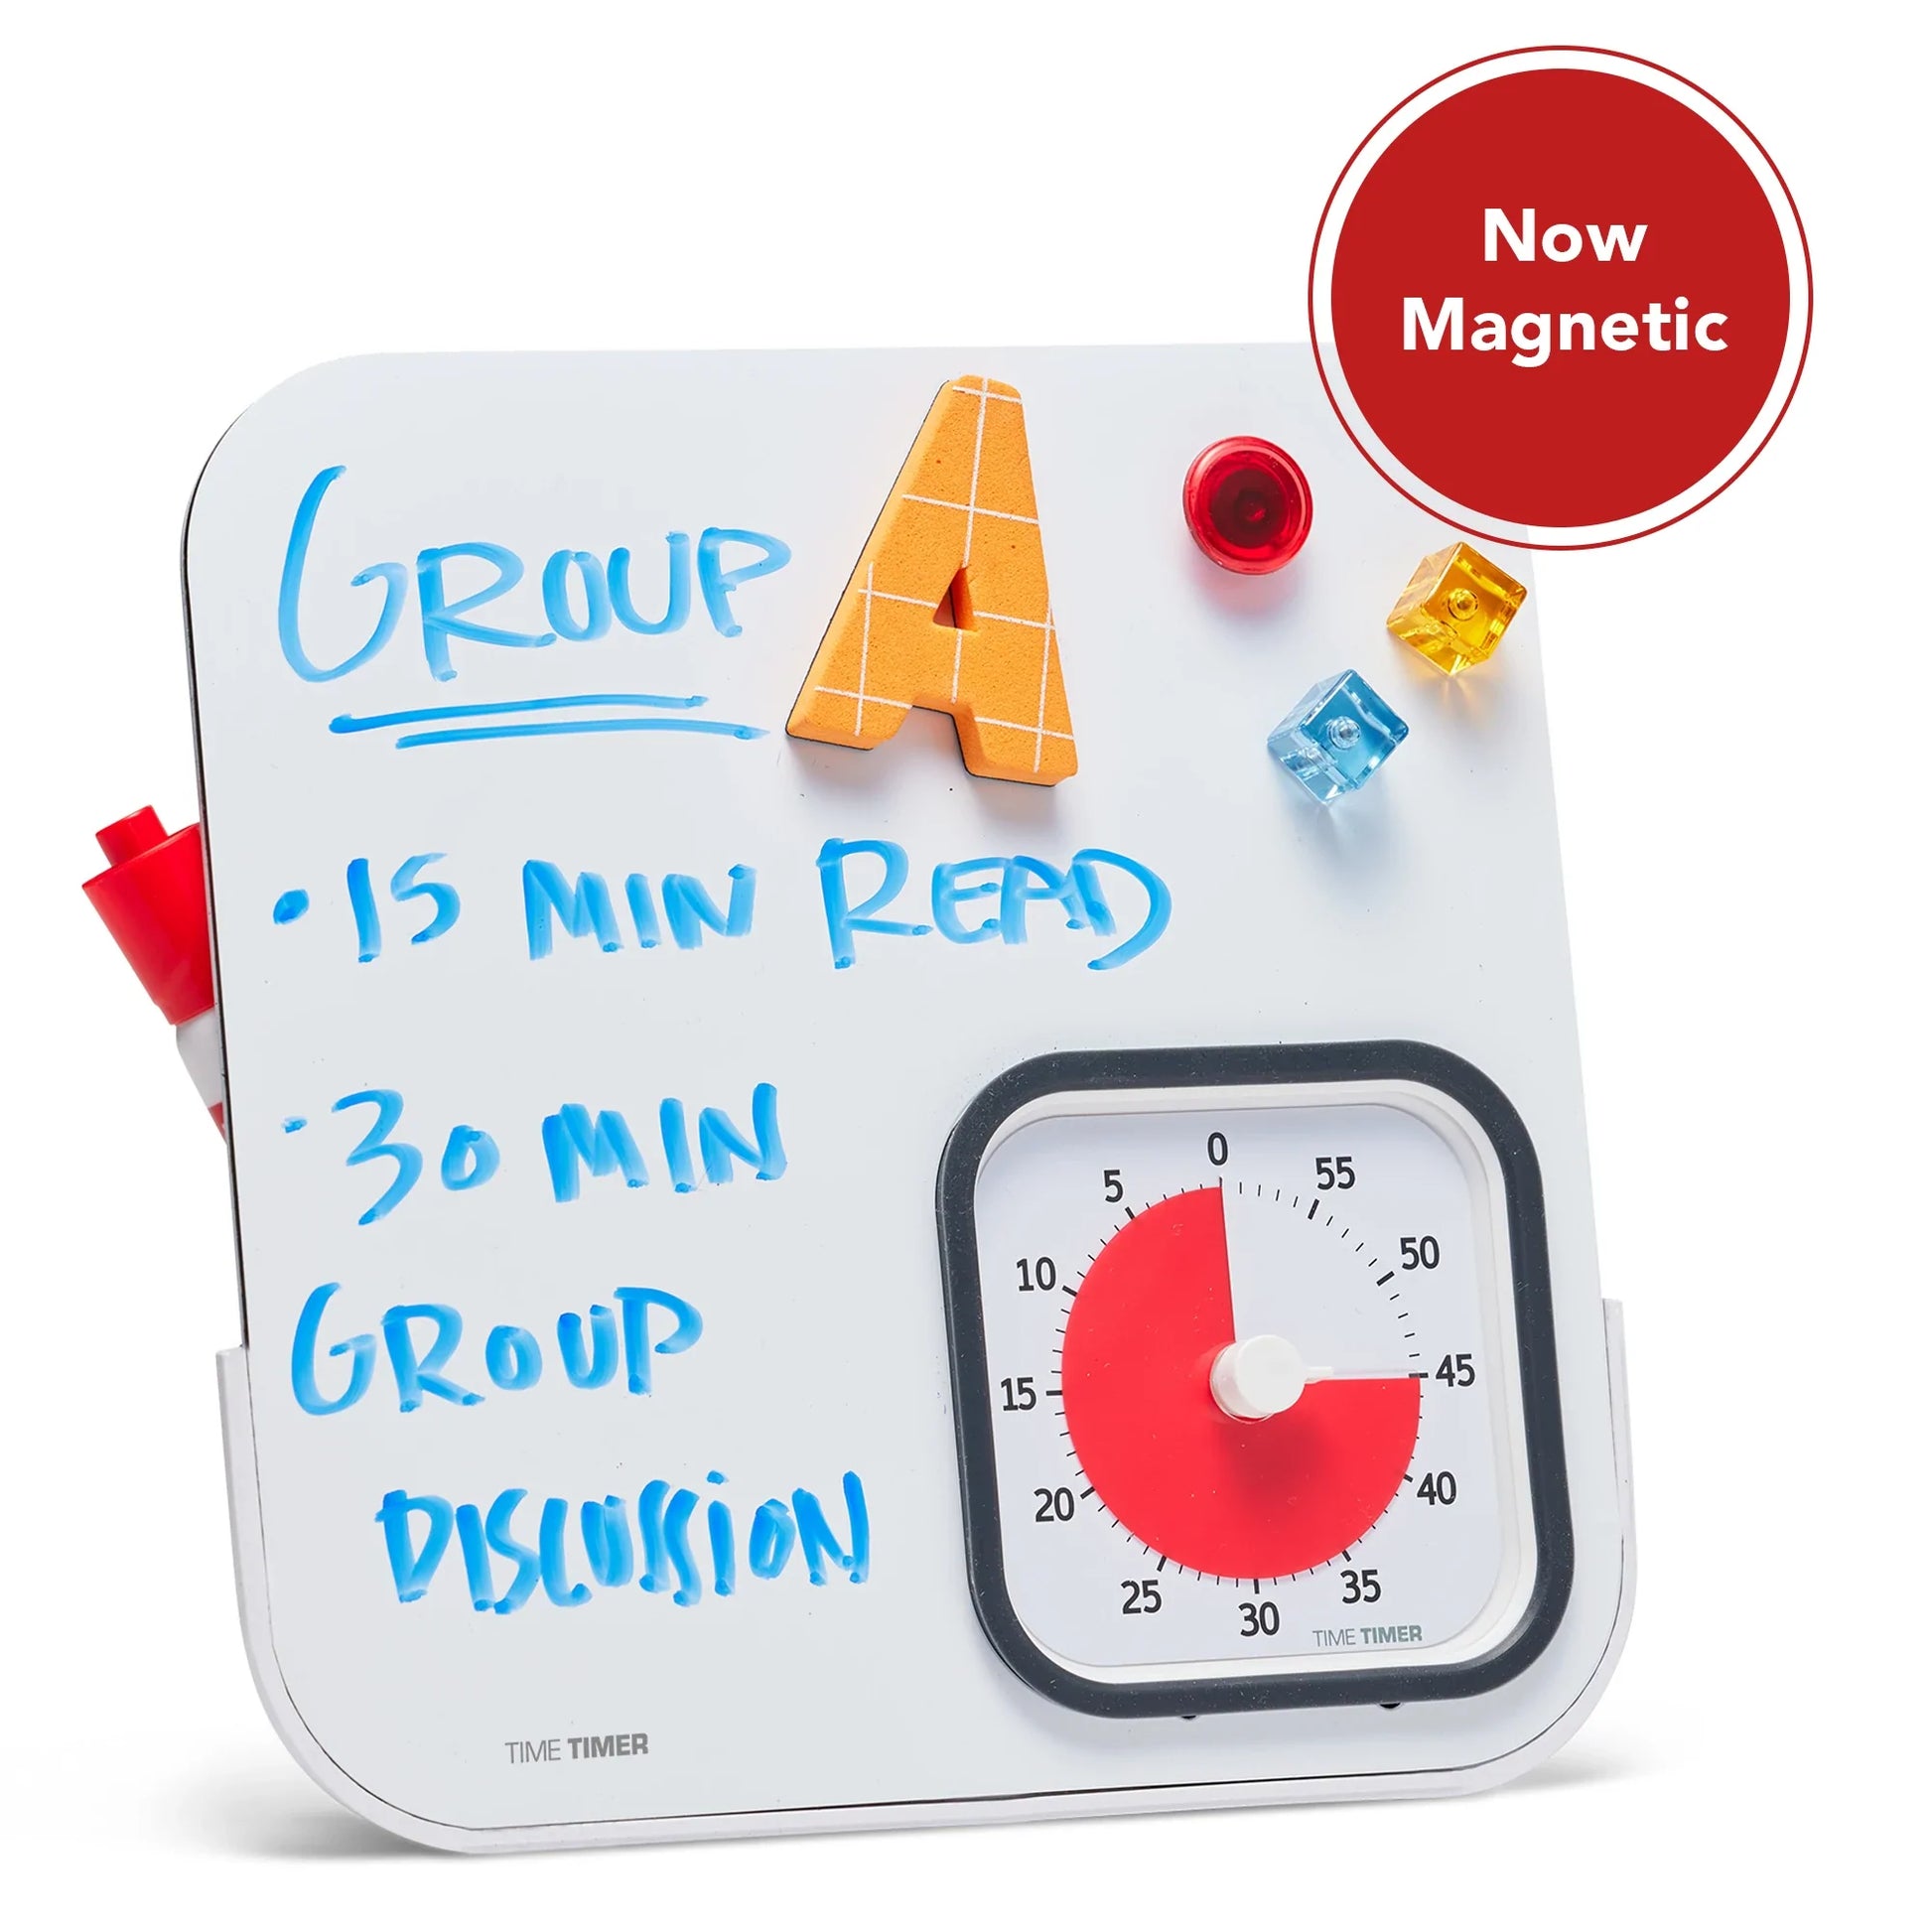 time_timer_education_edition_dry_erase_board_magnetic_says_GROUP_A_15_minute_read_20_min_group_discussion